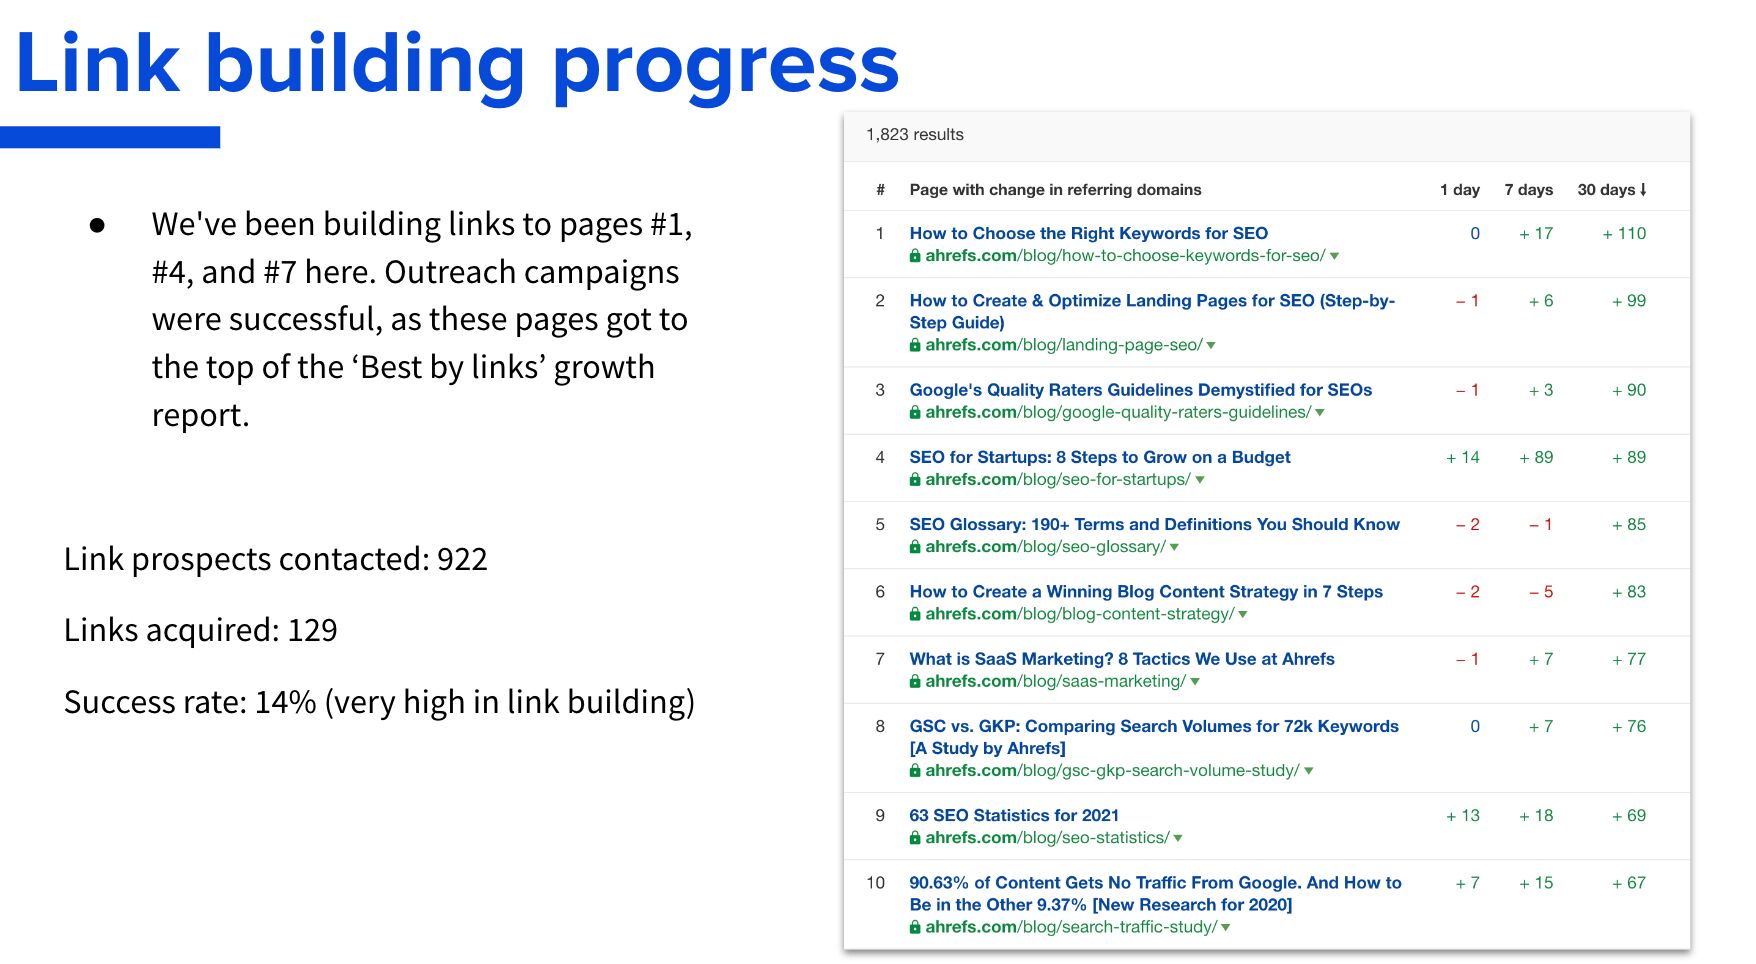 link-building-progress-screenshot Steal Our SEO Report Template (Inspired by SEO Experts)